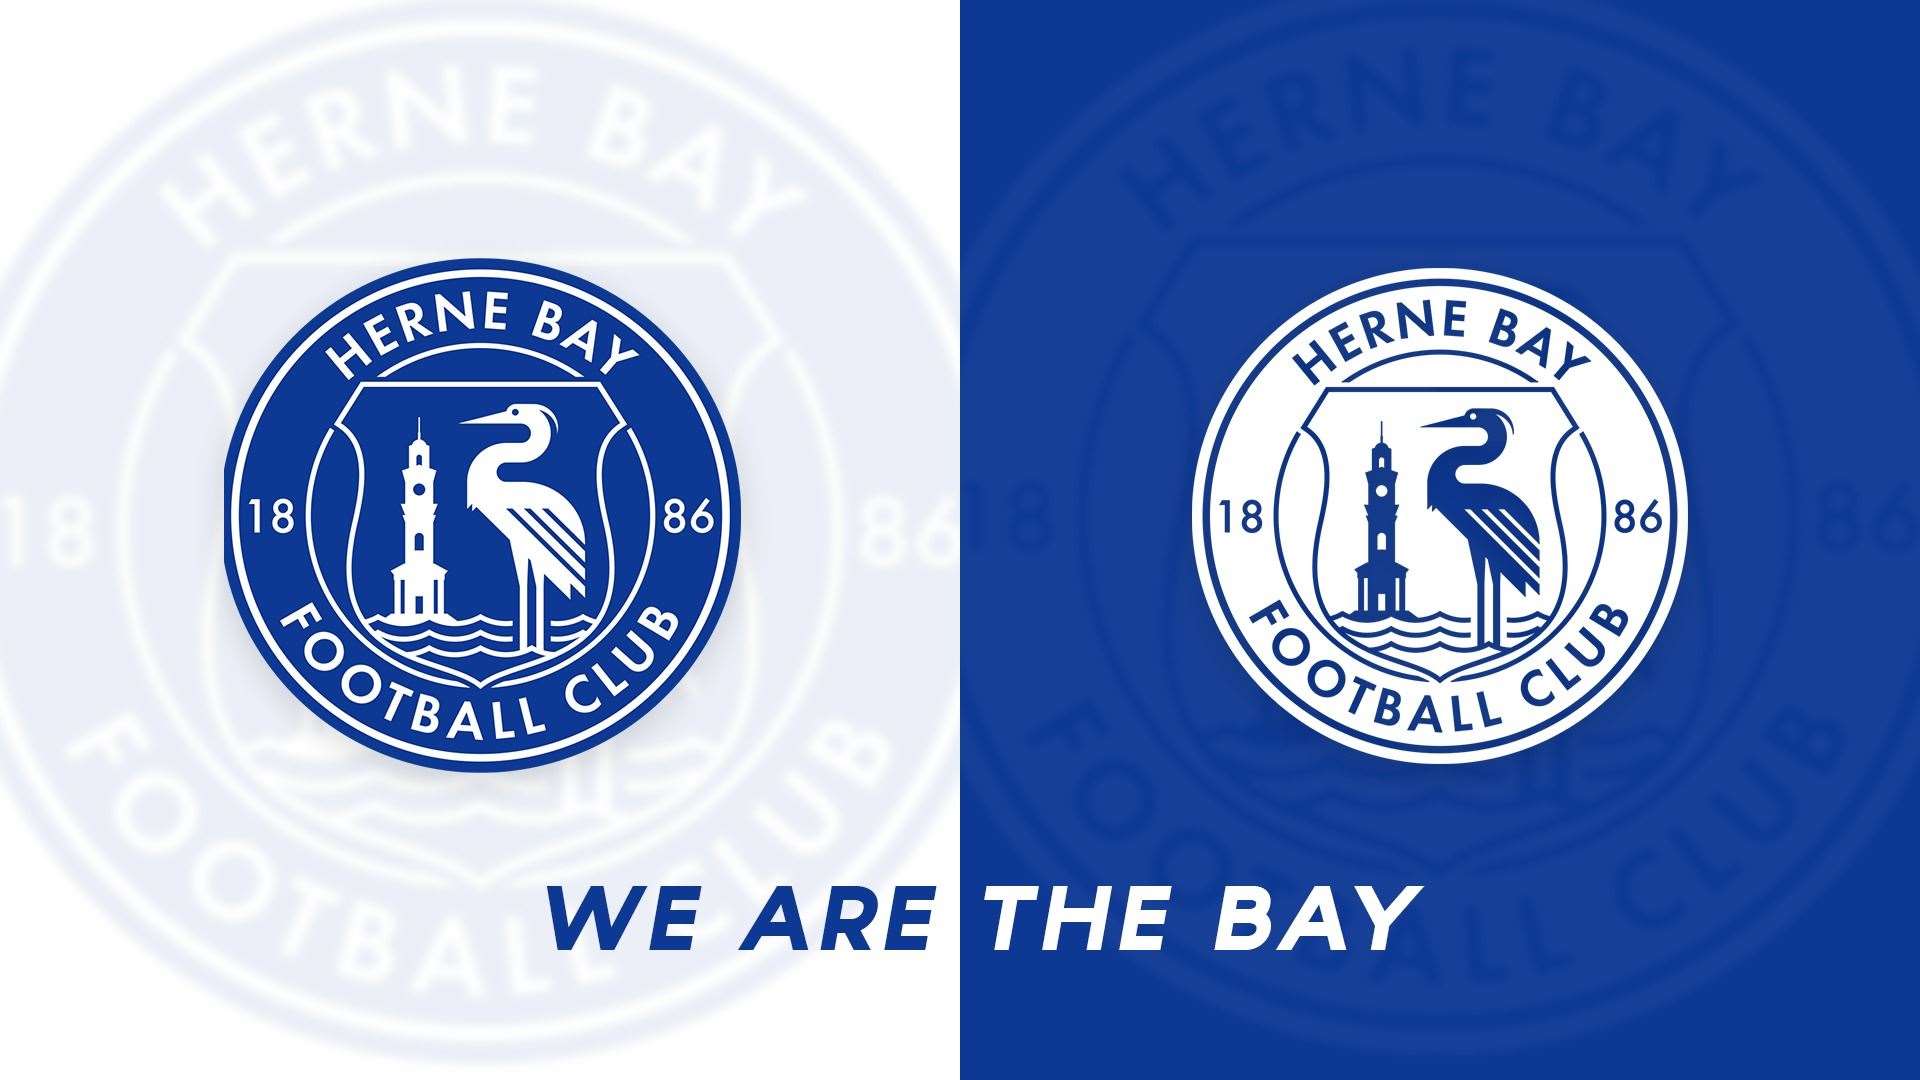 The new look Herne Bay badge (37983299)